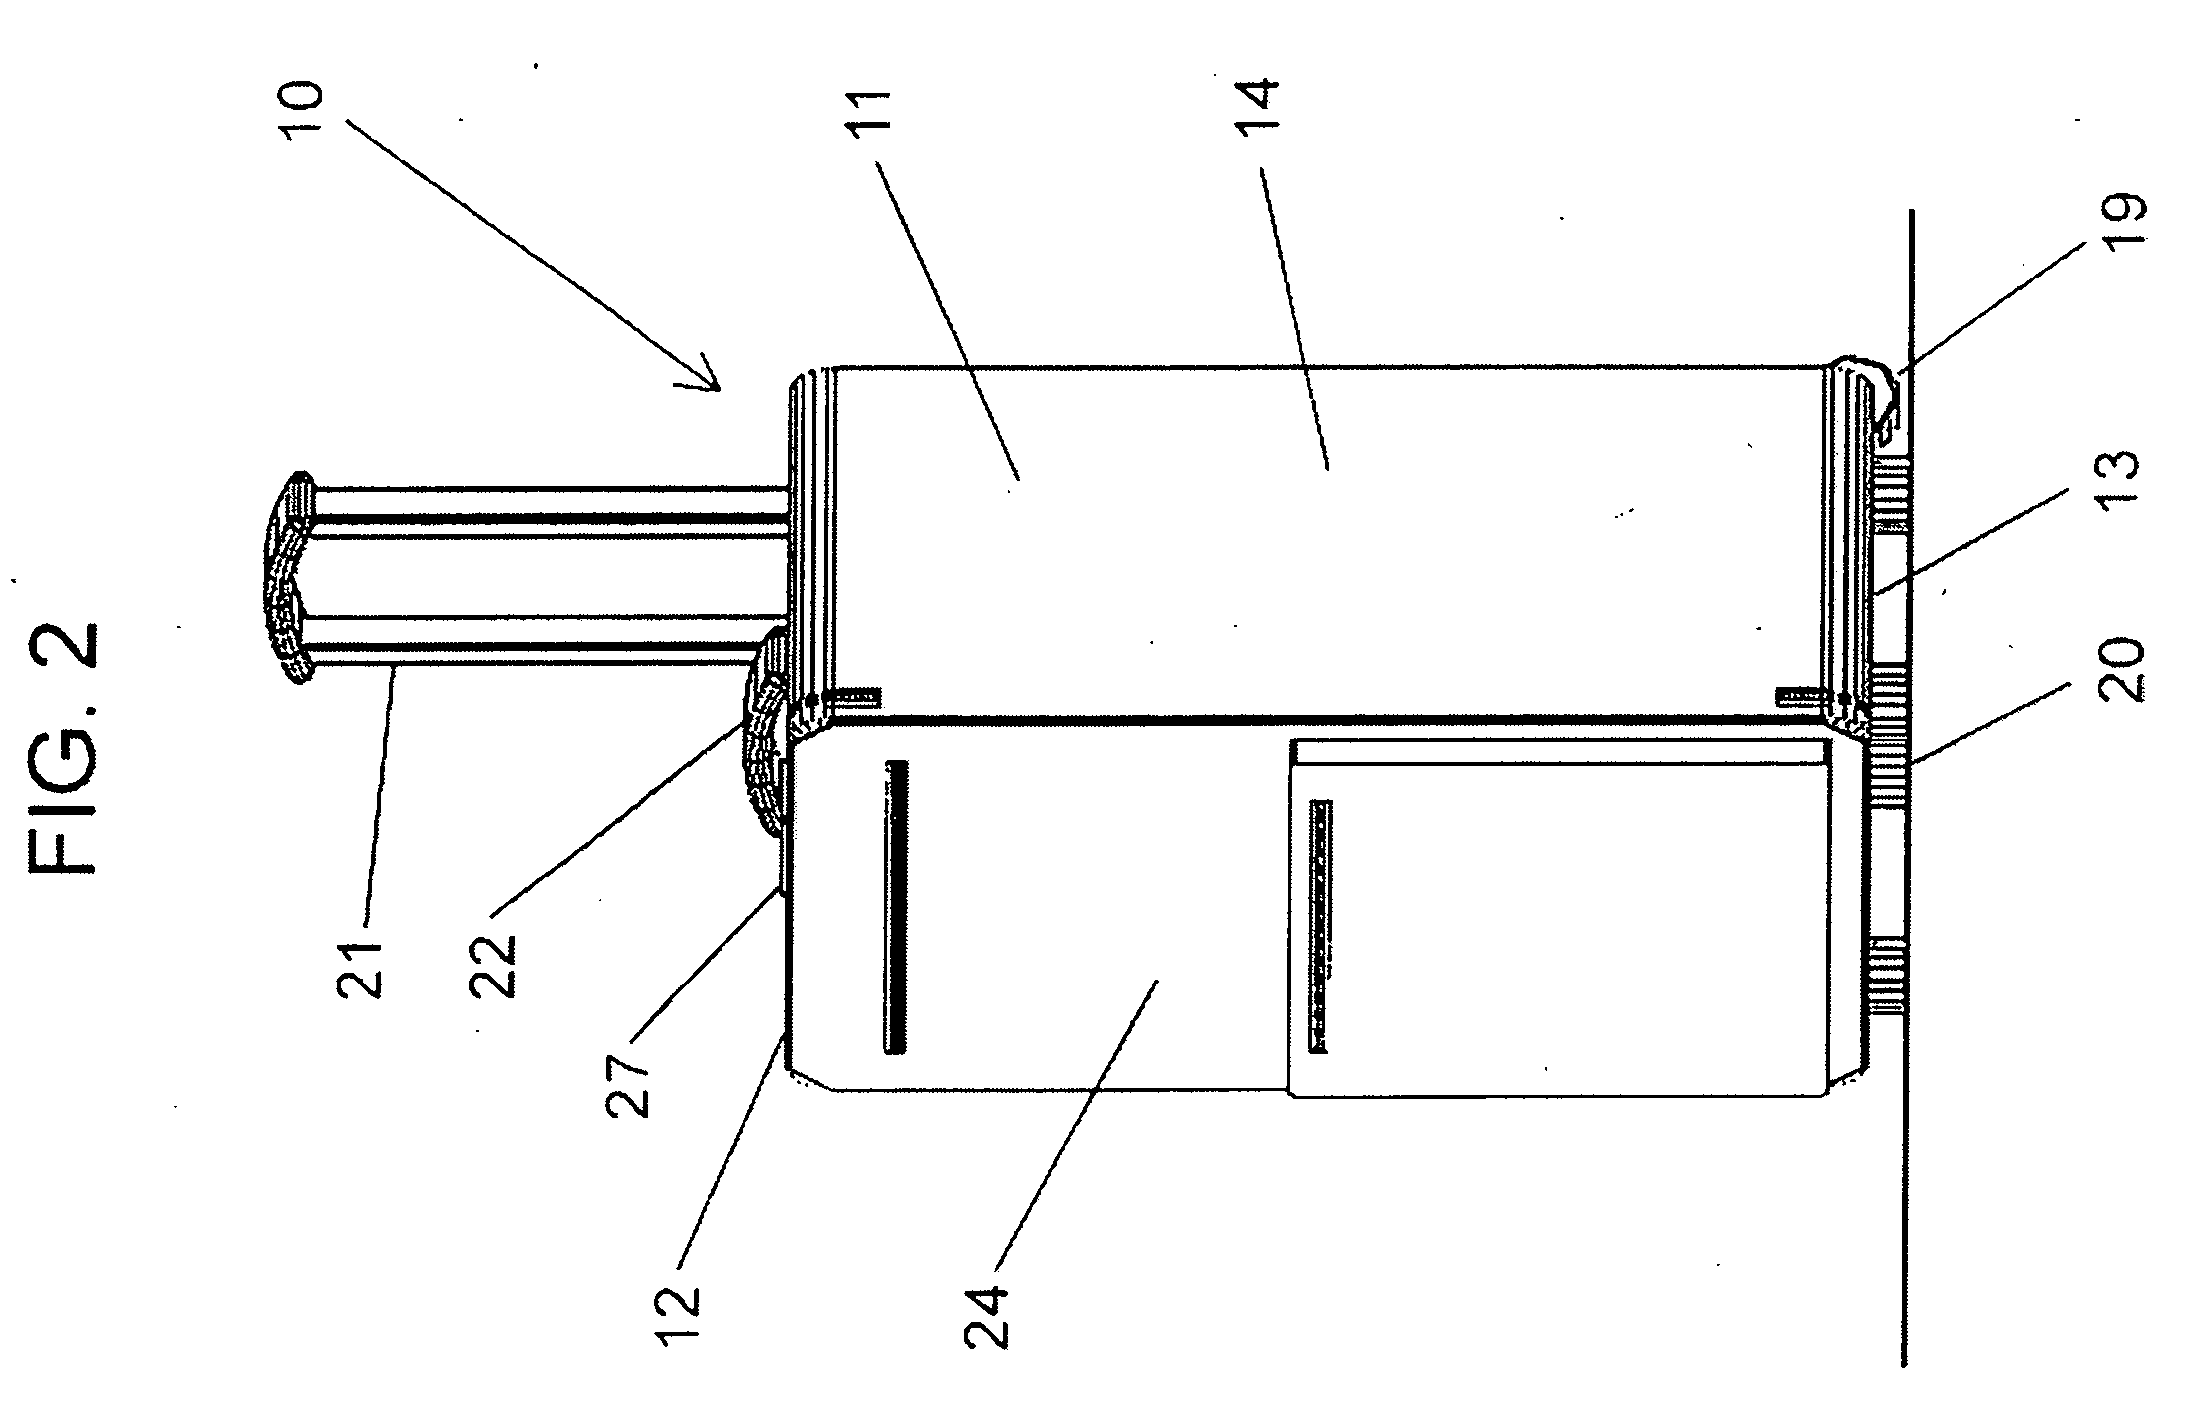 Container with built-in weighing device